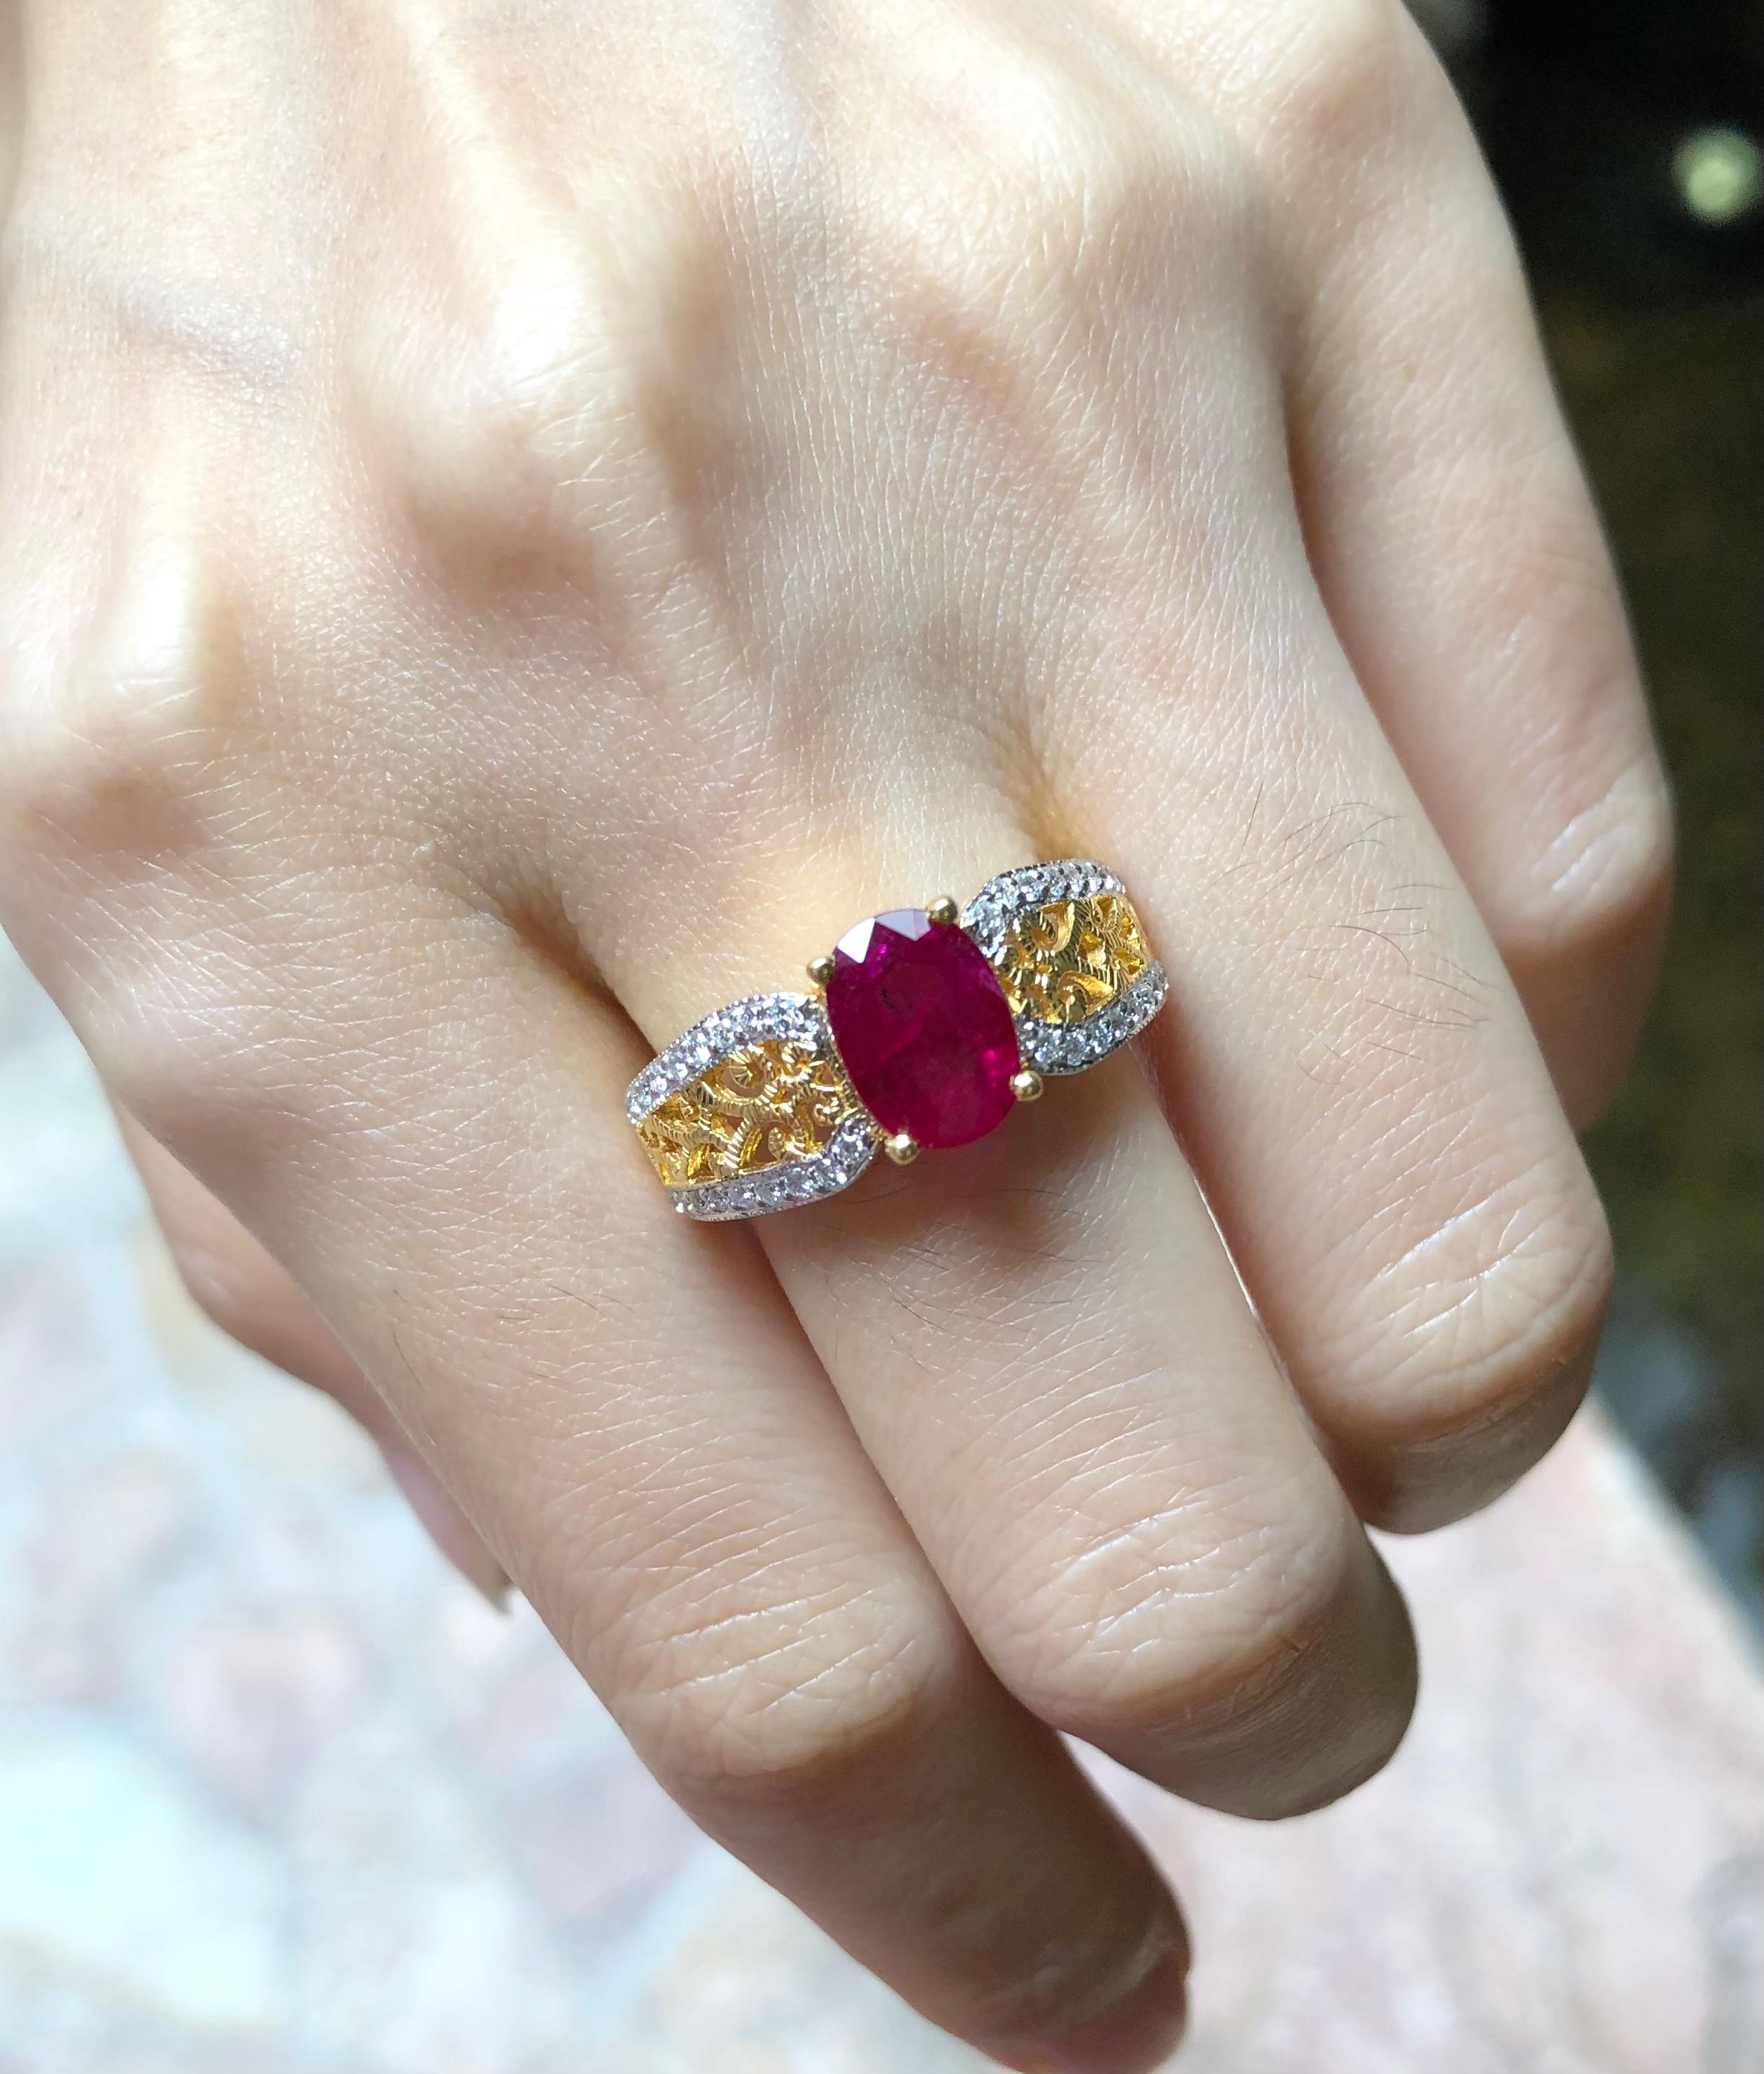 Ruby 1.54 carats with Diamond 0.26 carat Ring set in 18 Karat Gold Settings

Width:  0.7 cm 
Length:  0.9 cm
Ring Size: 57
Total Weight: 6.43 grams

